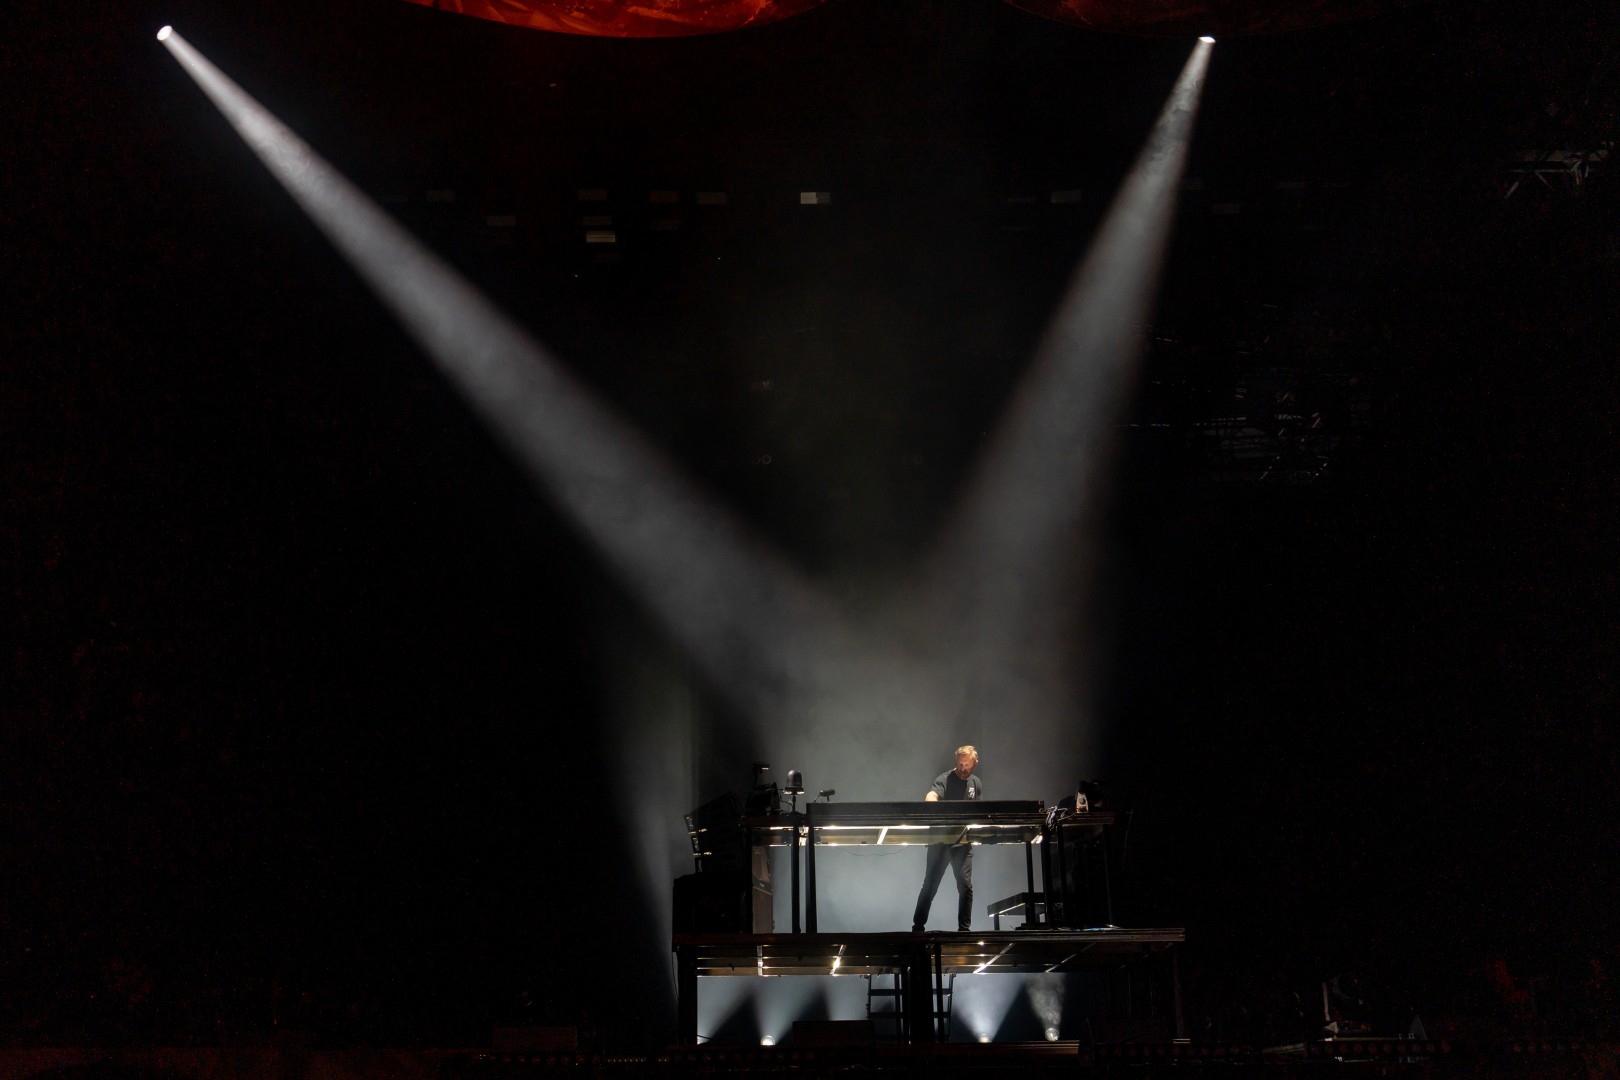 David Guetta at Cluj Arena in Cluj-Napoca on August 7, 2022 (4af8a8c849)